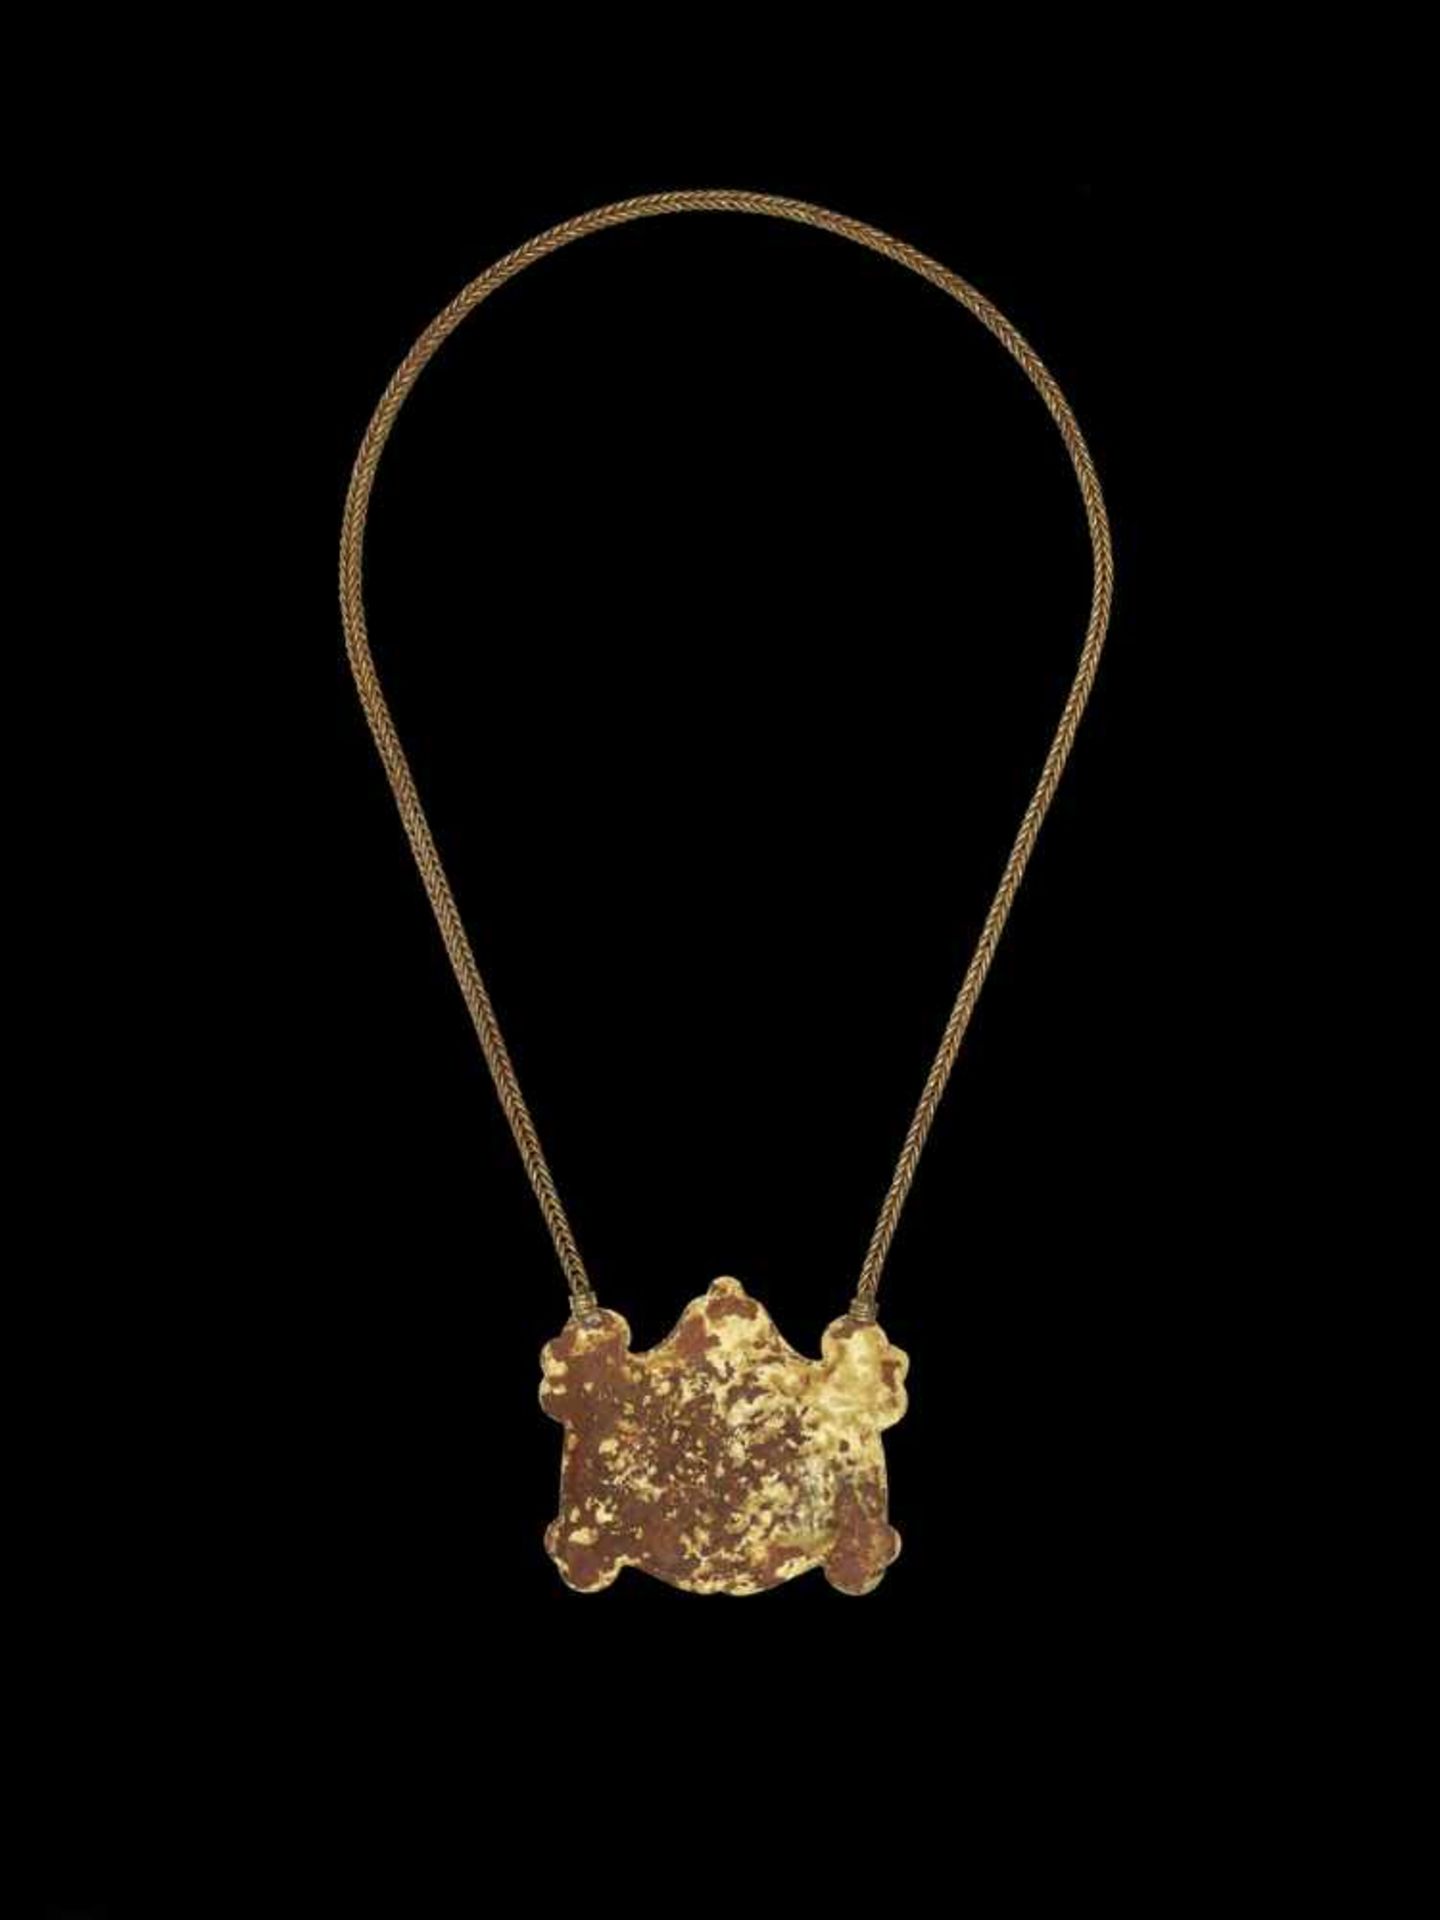 A CHAM REPOUSSÉ GOLD NECKLACE WITH A PECTORAL DEPICTING A SEATED HINDU DEITY Central Cham kingdom, - Image 4 of 5